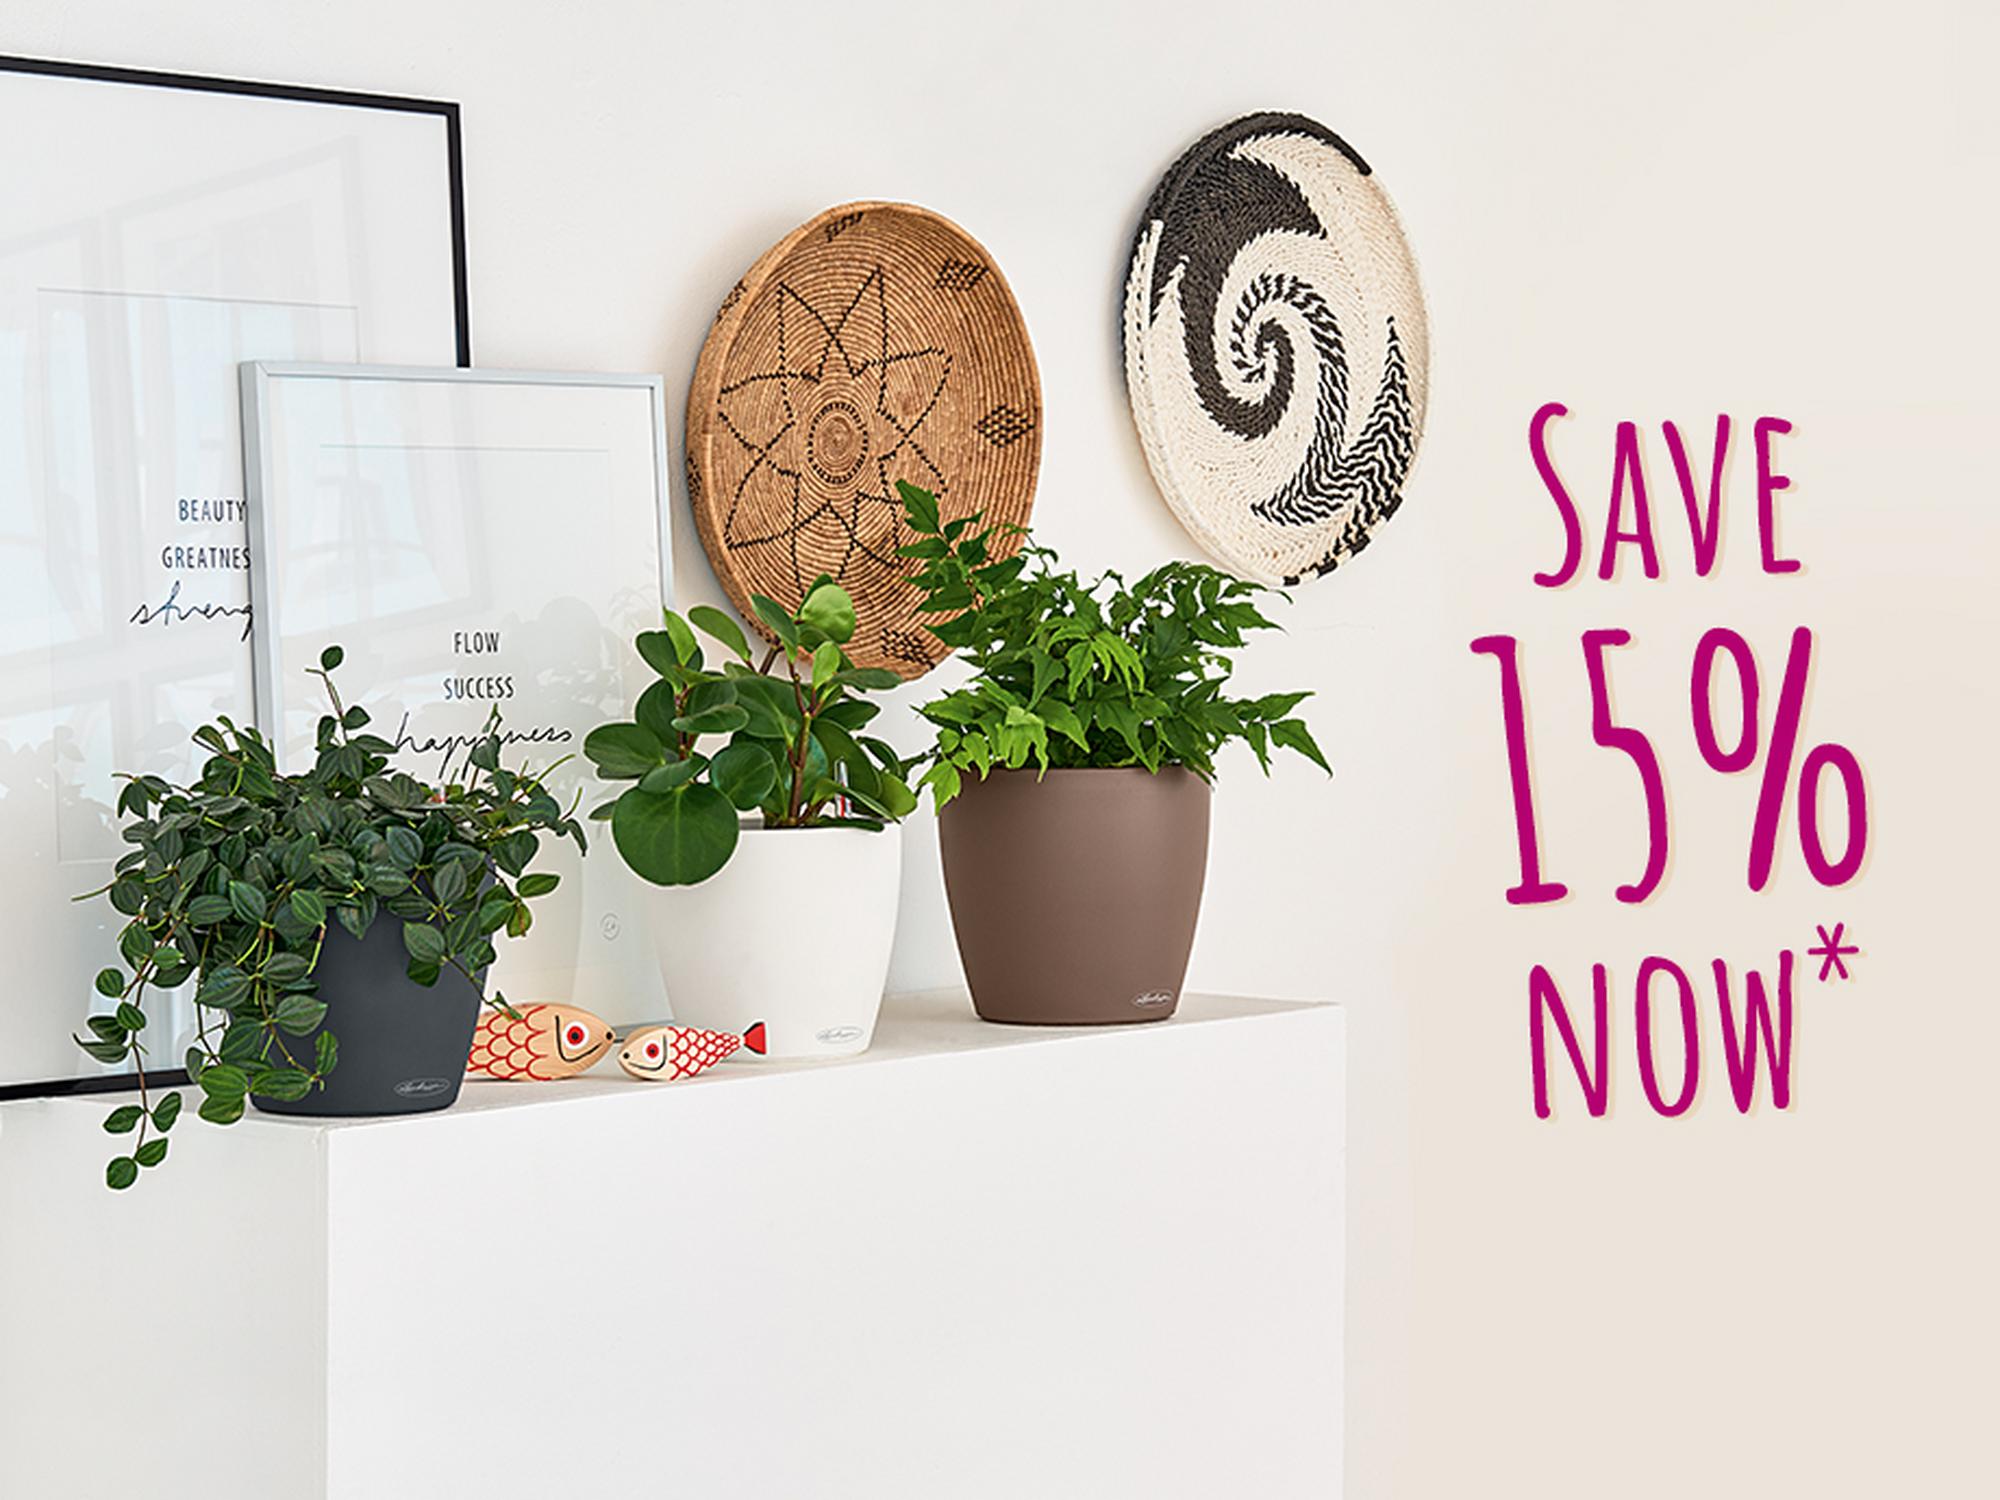 Save 15% now - Free UK Mainland Delivery* + Exclusive Planting Instruction*